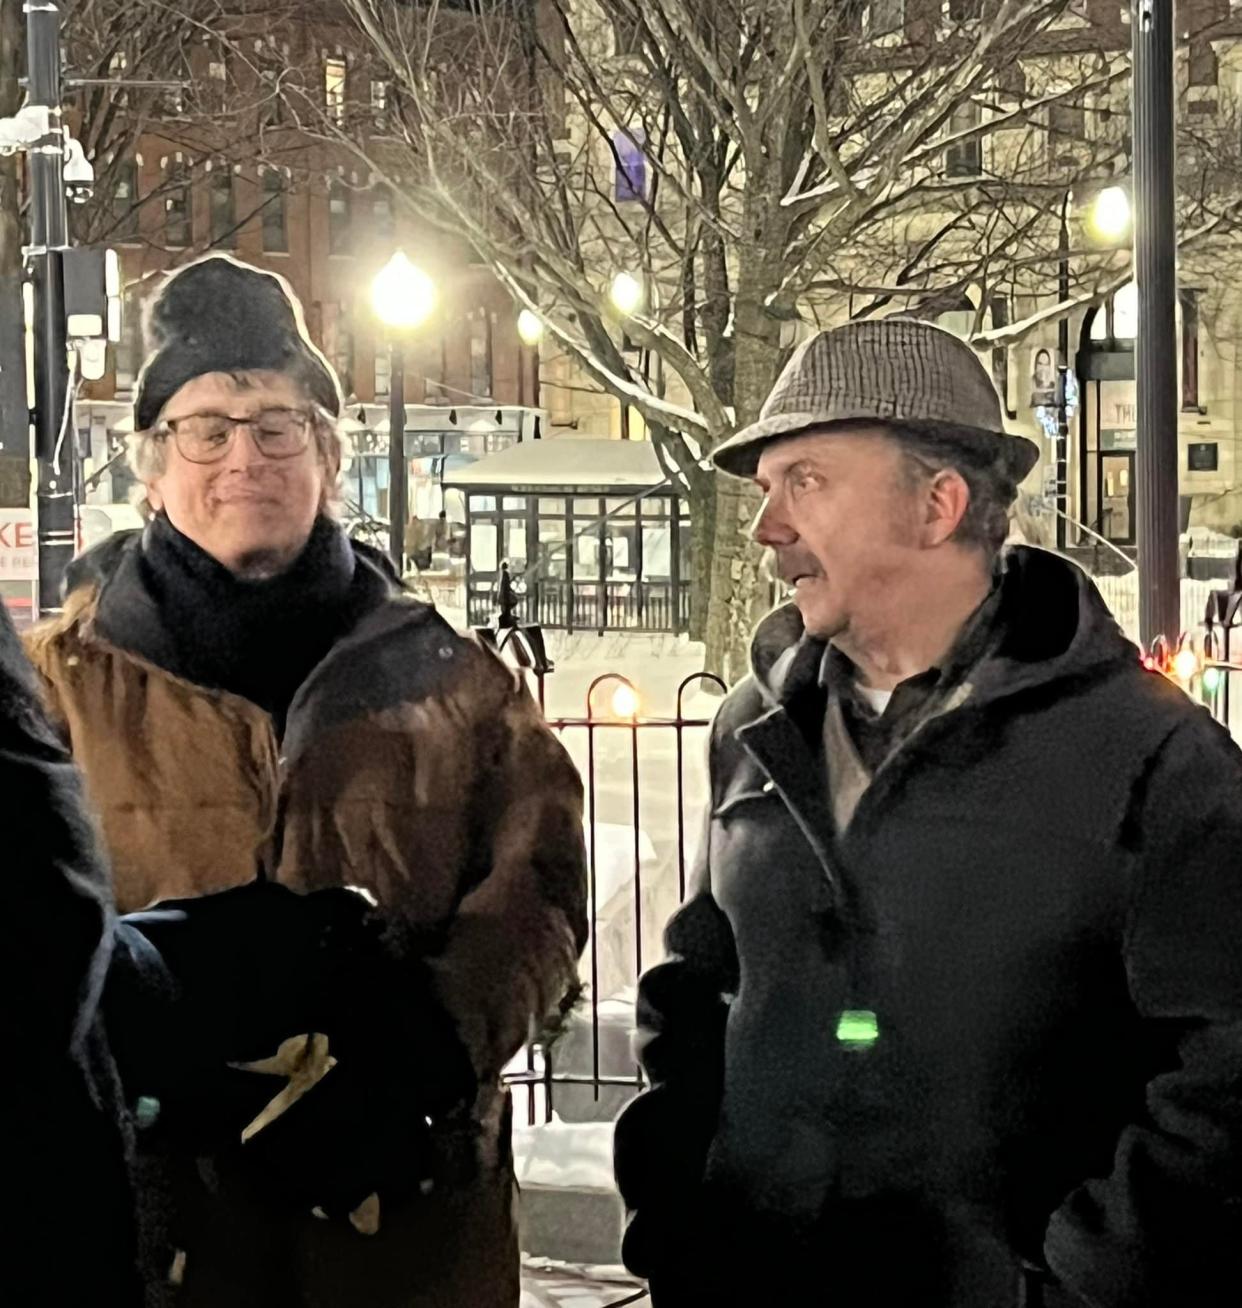 Director Alexander Payne, left, and actor Paul Giamatti after wrapping up a scene for "The Holdovers" shot on the Worcester Common Feb. 26, 2022.